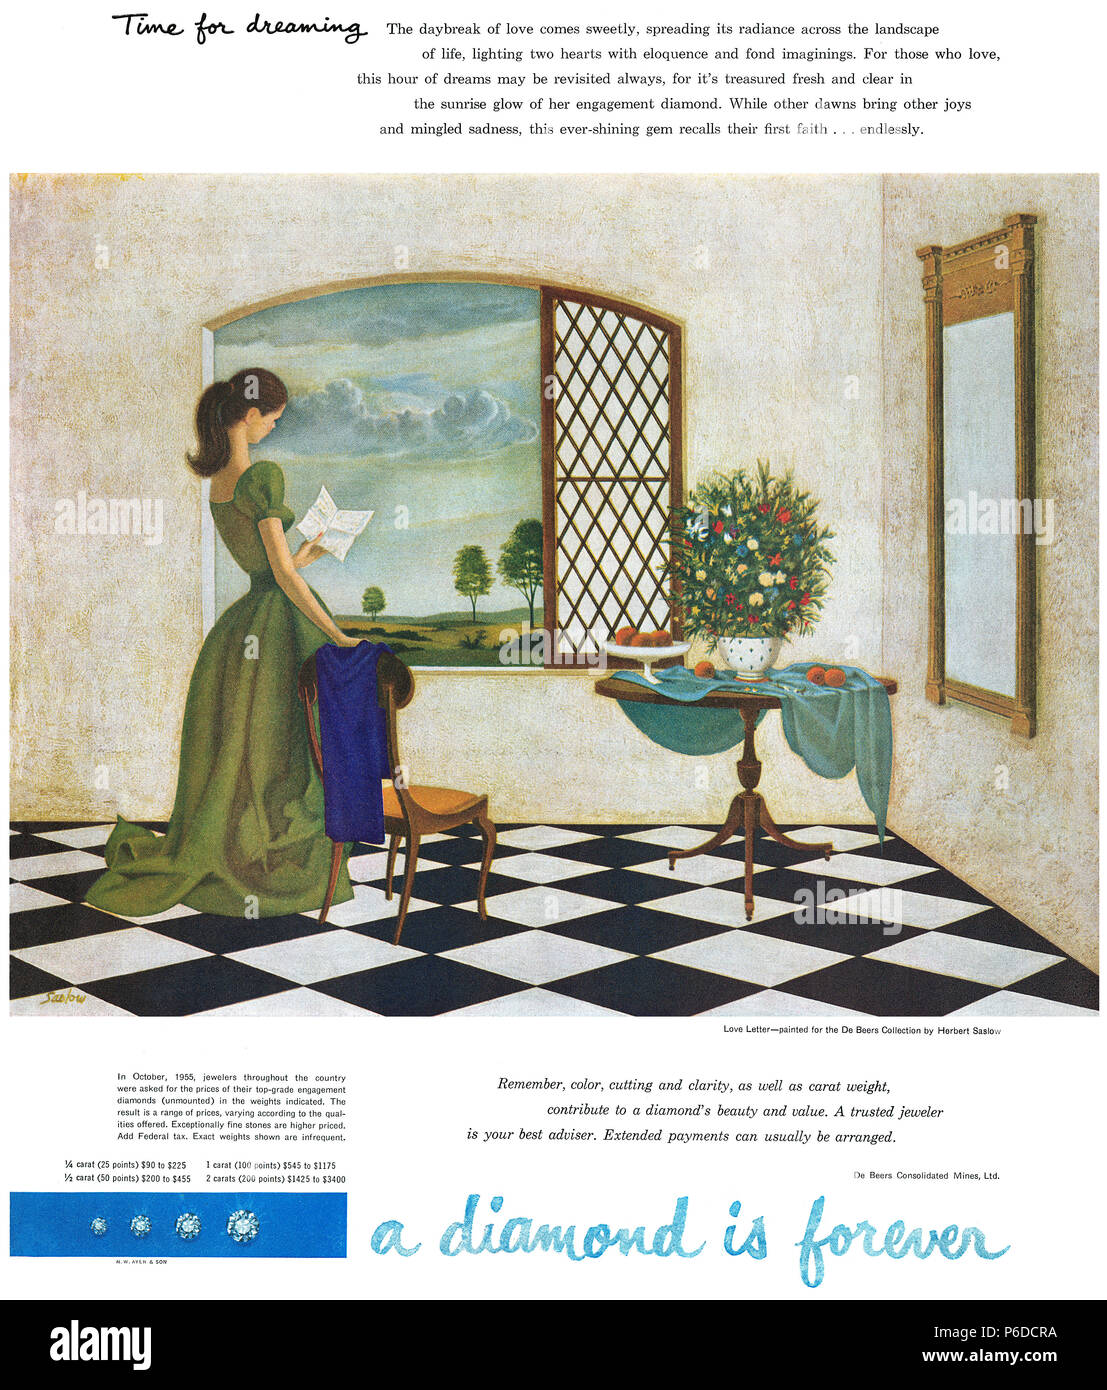 My favourite ad of all time: DeBeers 'A diamond is forever' from 1938  onwards - Mumbrella Asia